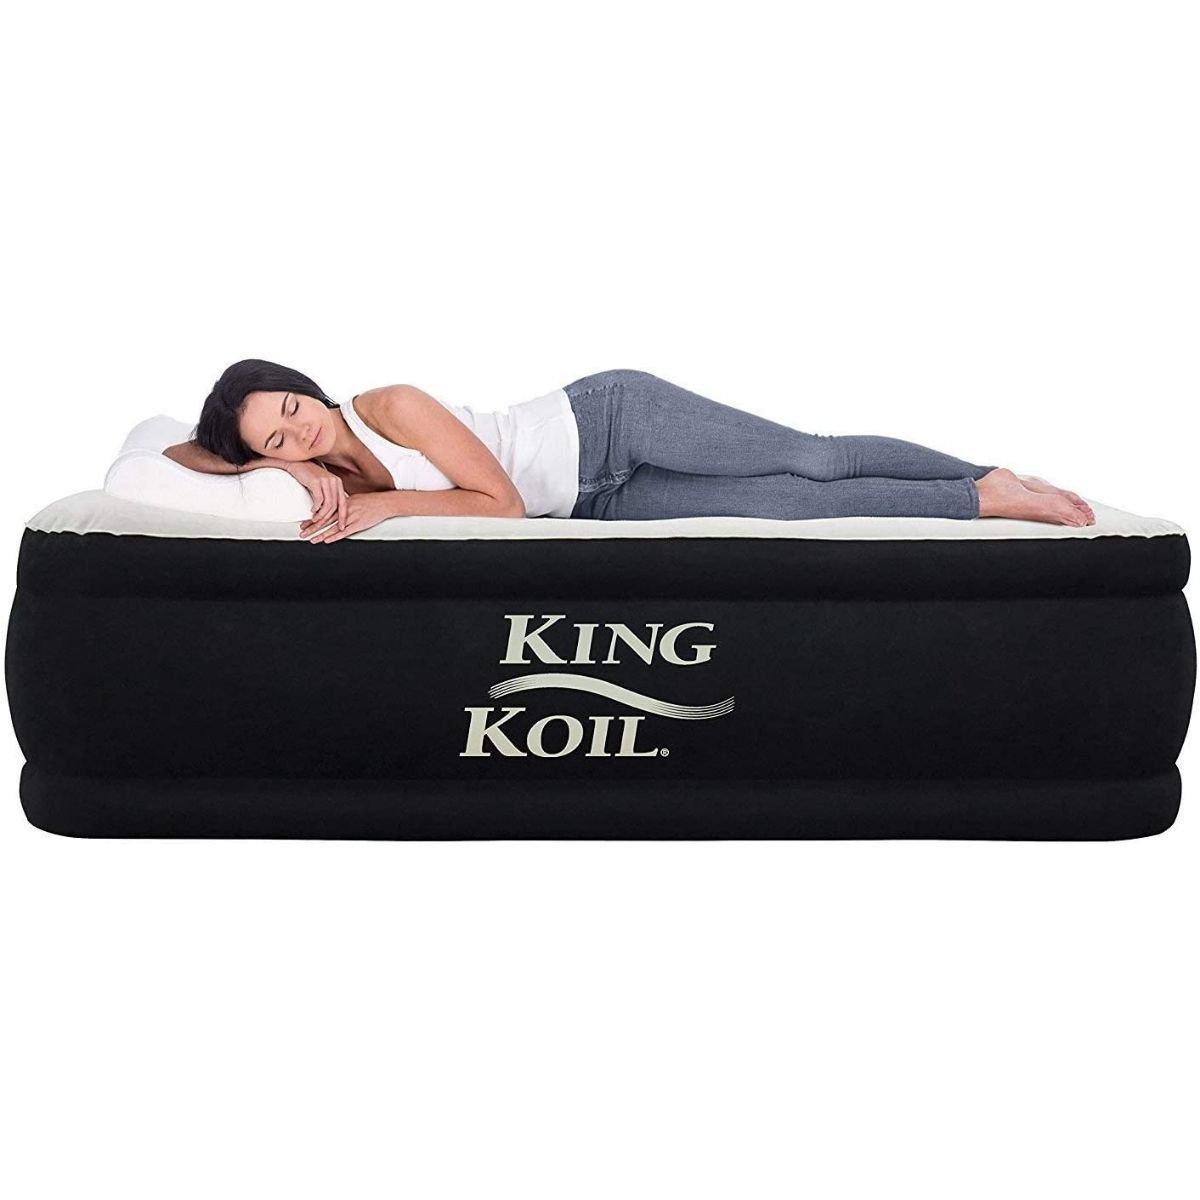 King Koil Luxury Air Mattress With Built-in Pump